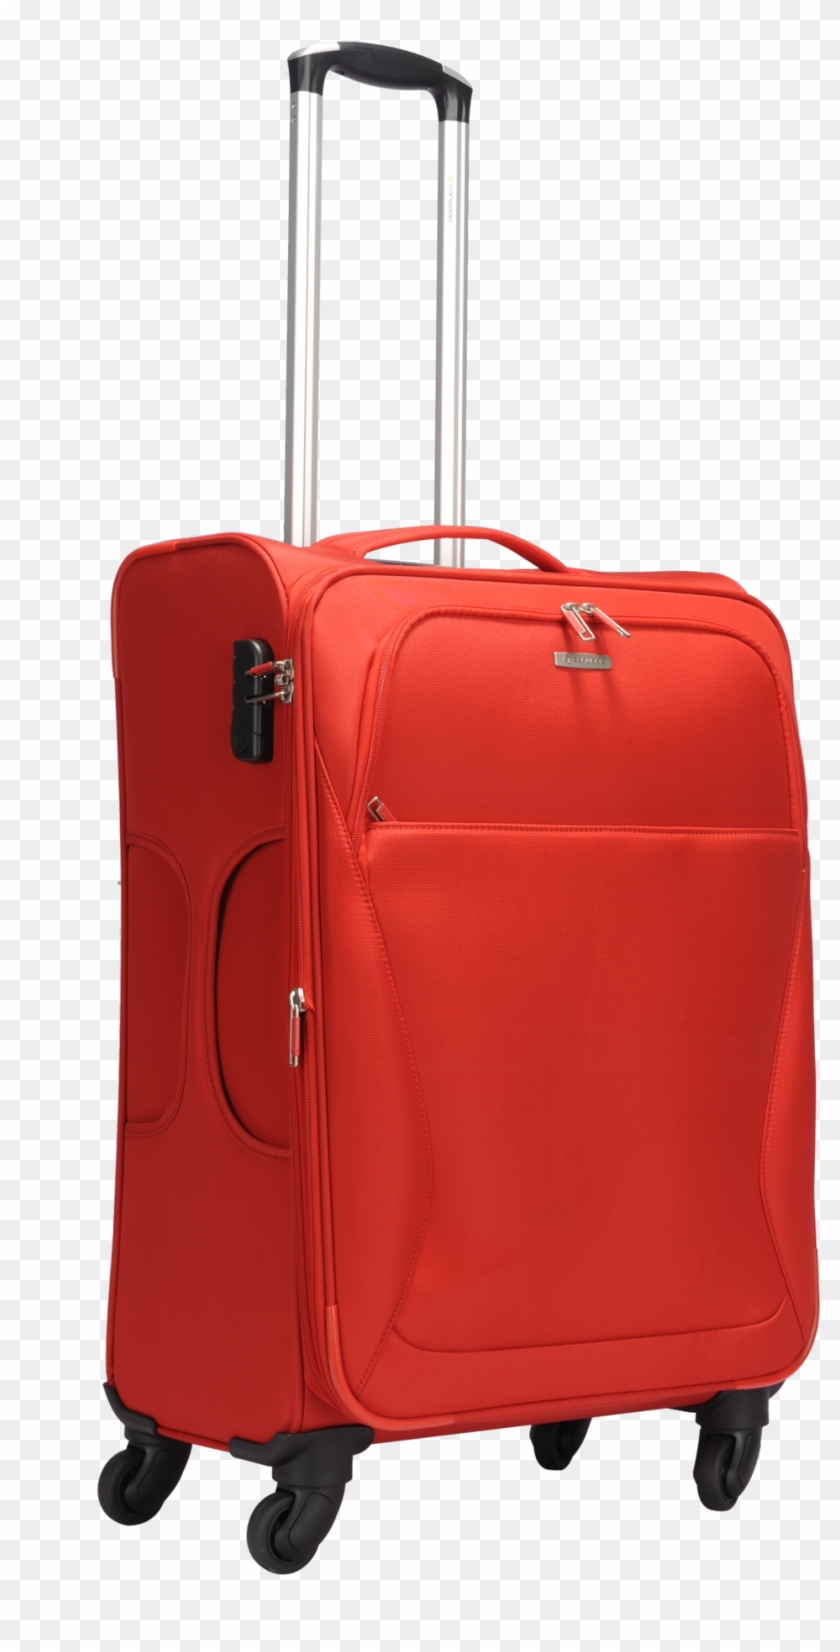 Download - Red Suitcase Png #1152582